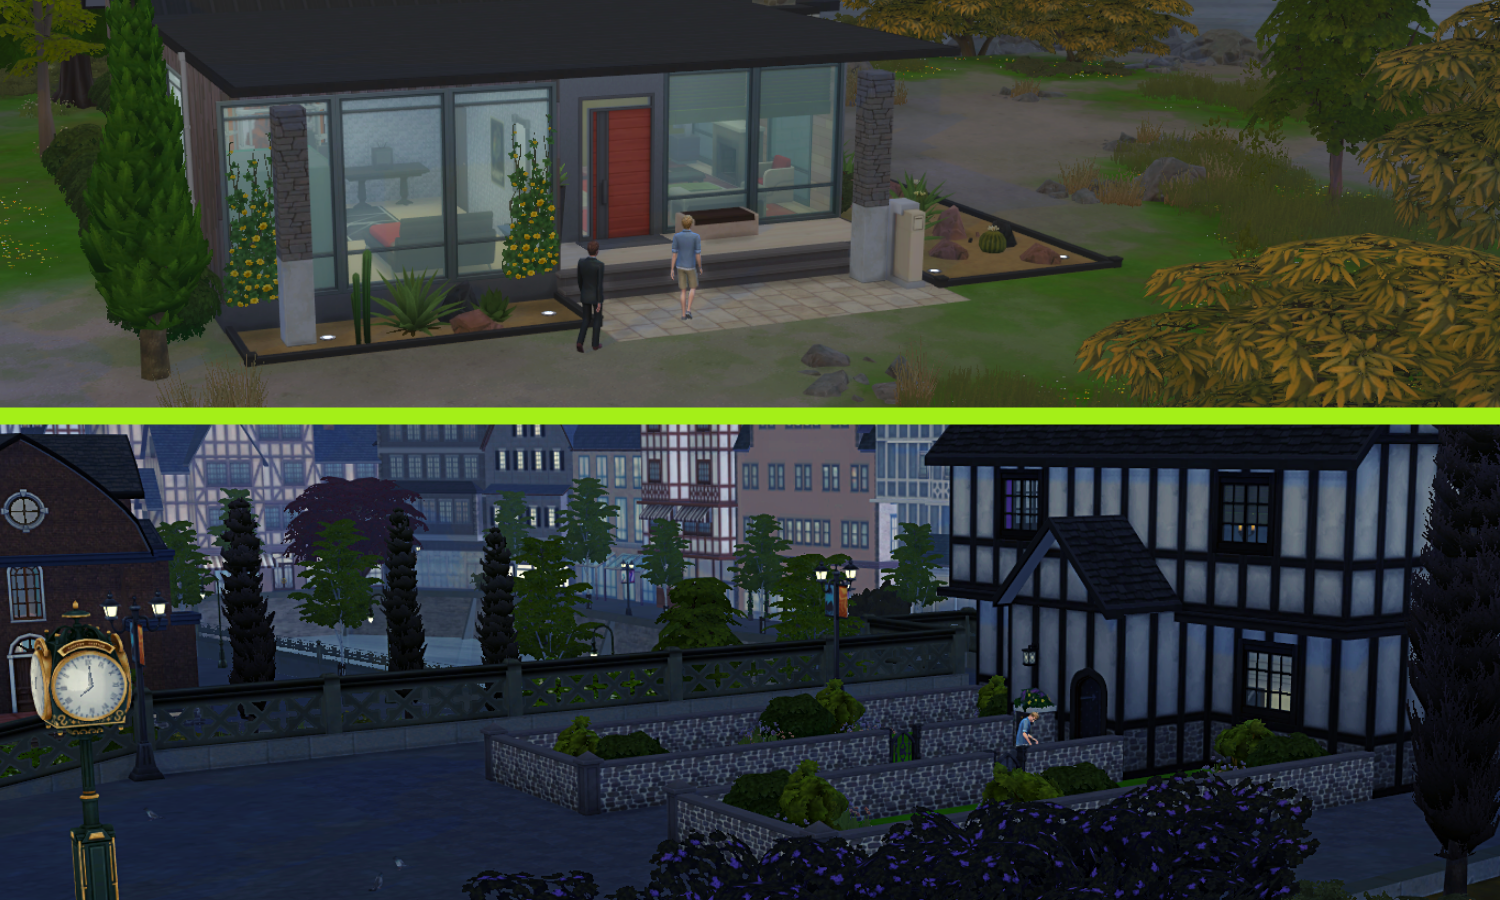 Sims 4' Free Real Estate Cheat: Move Your Sims to Any House